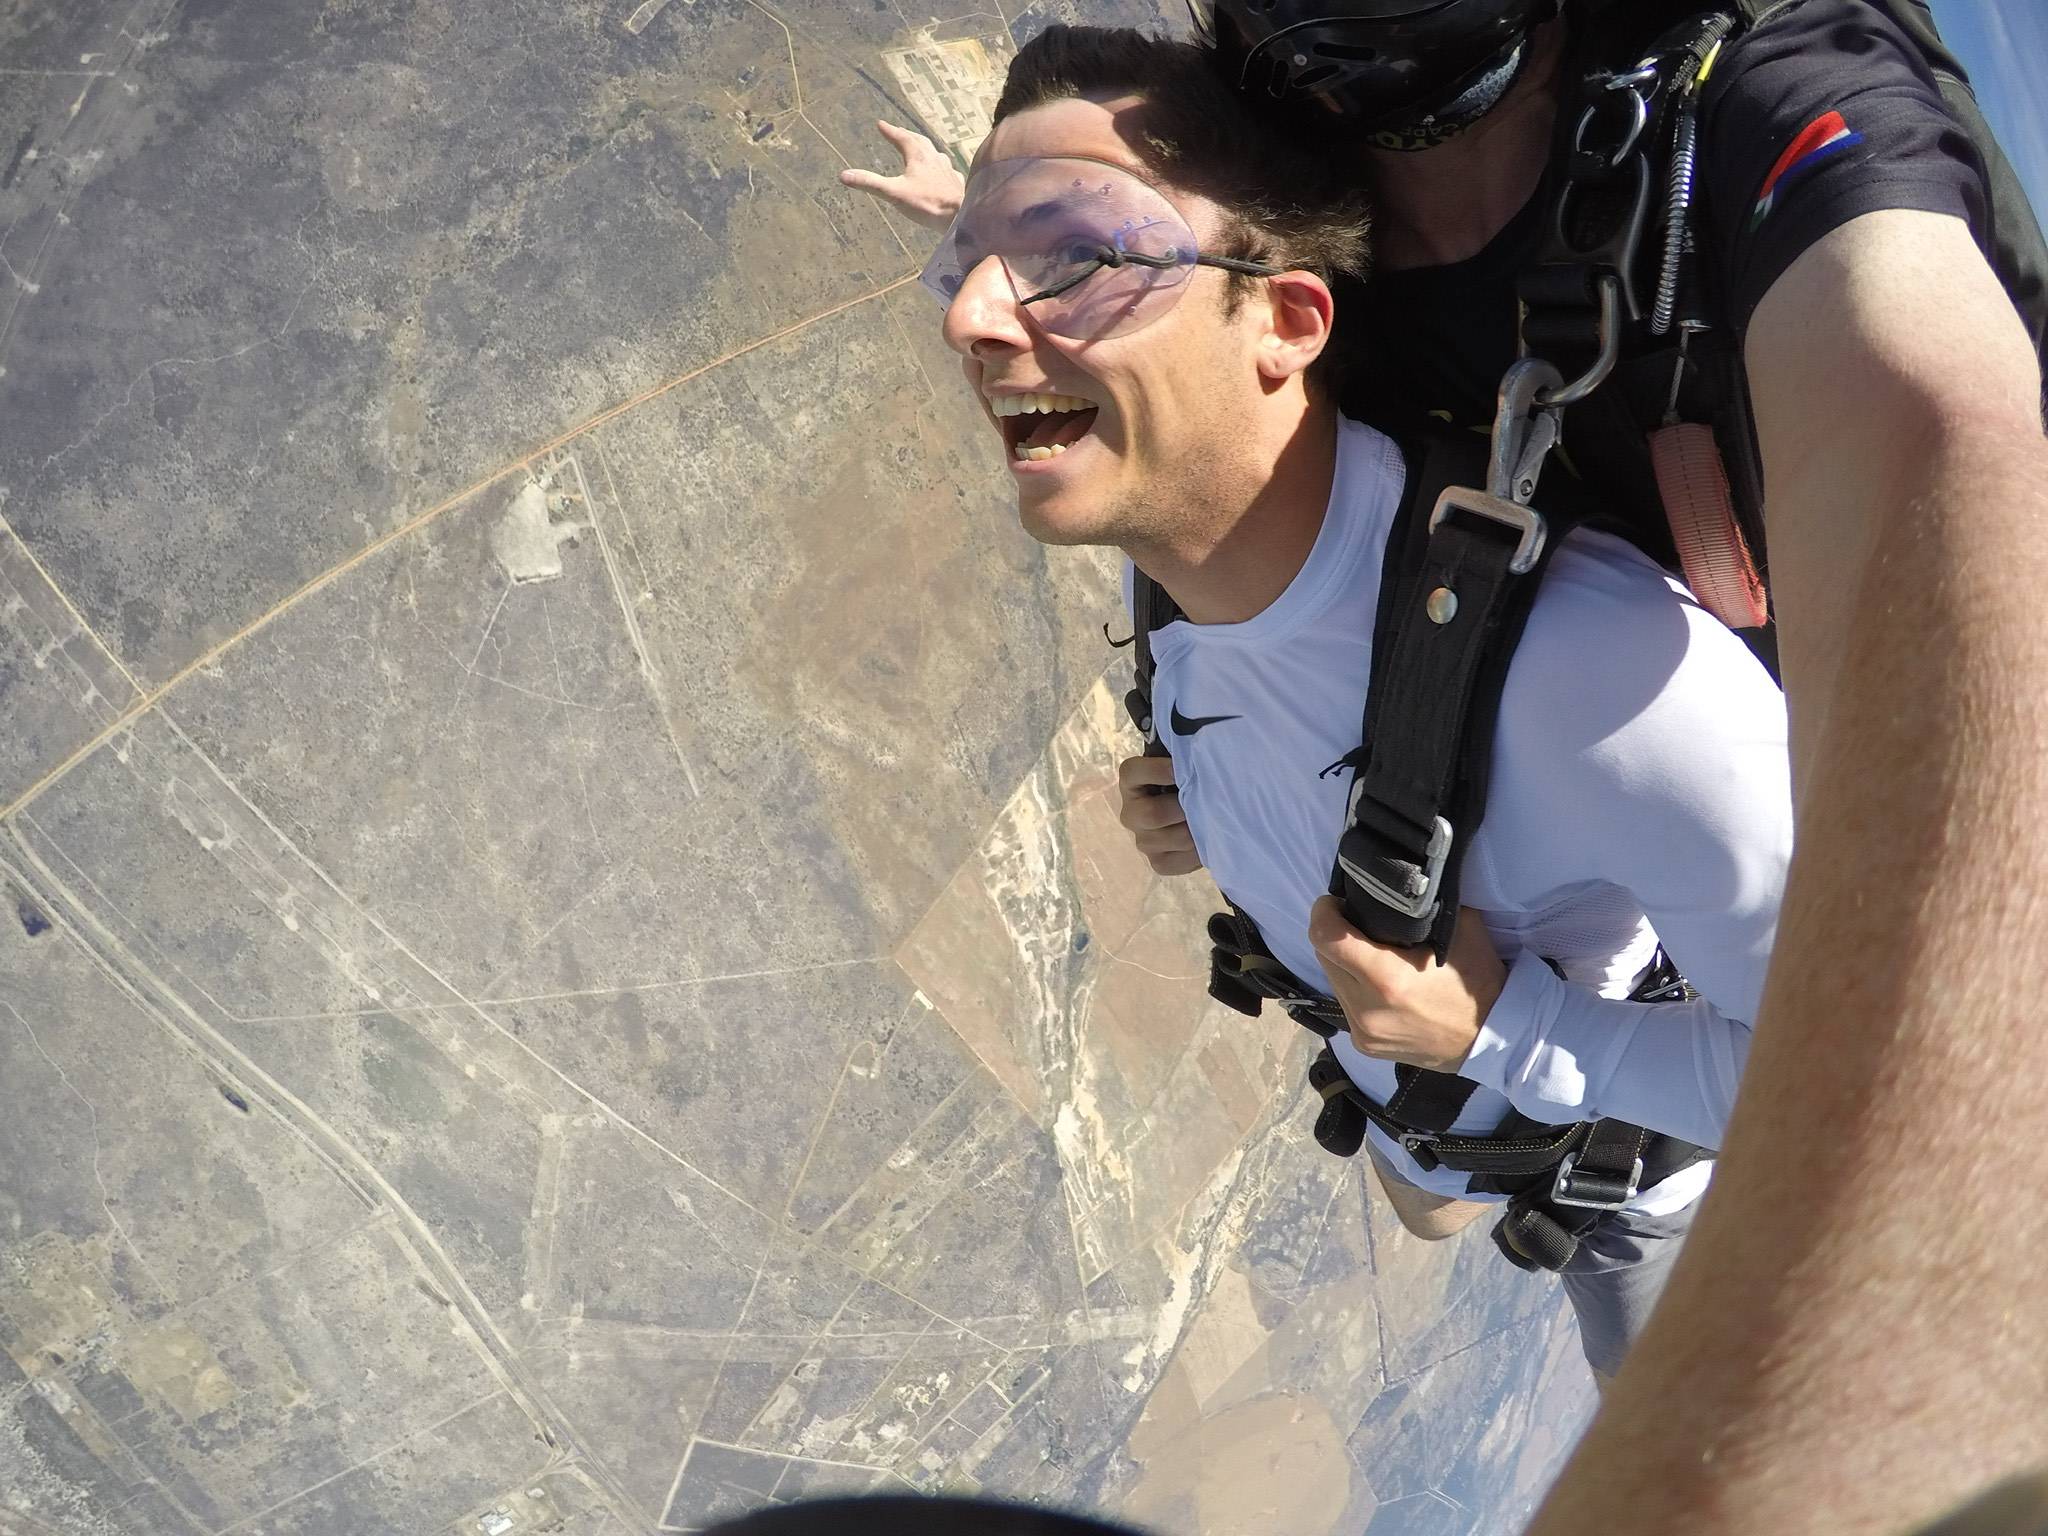 Joseph Berberich '24 skydiving in Cape Town, South Africa.